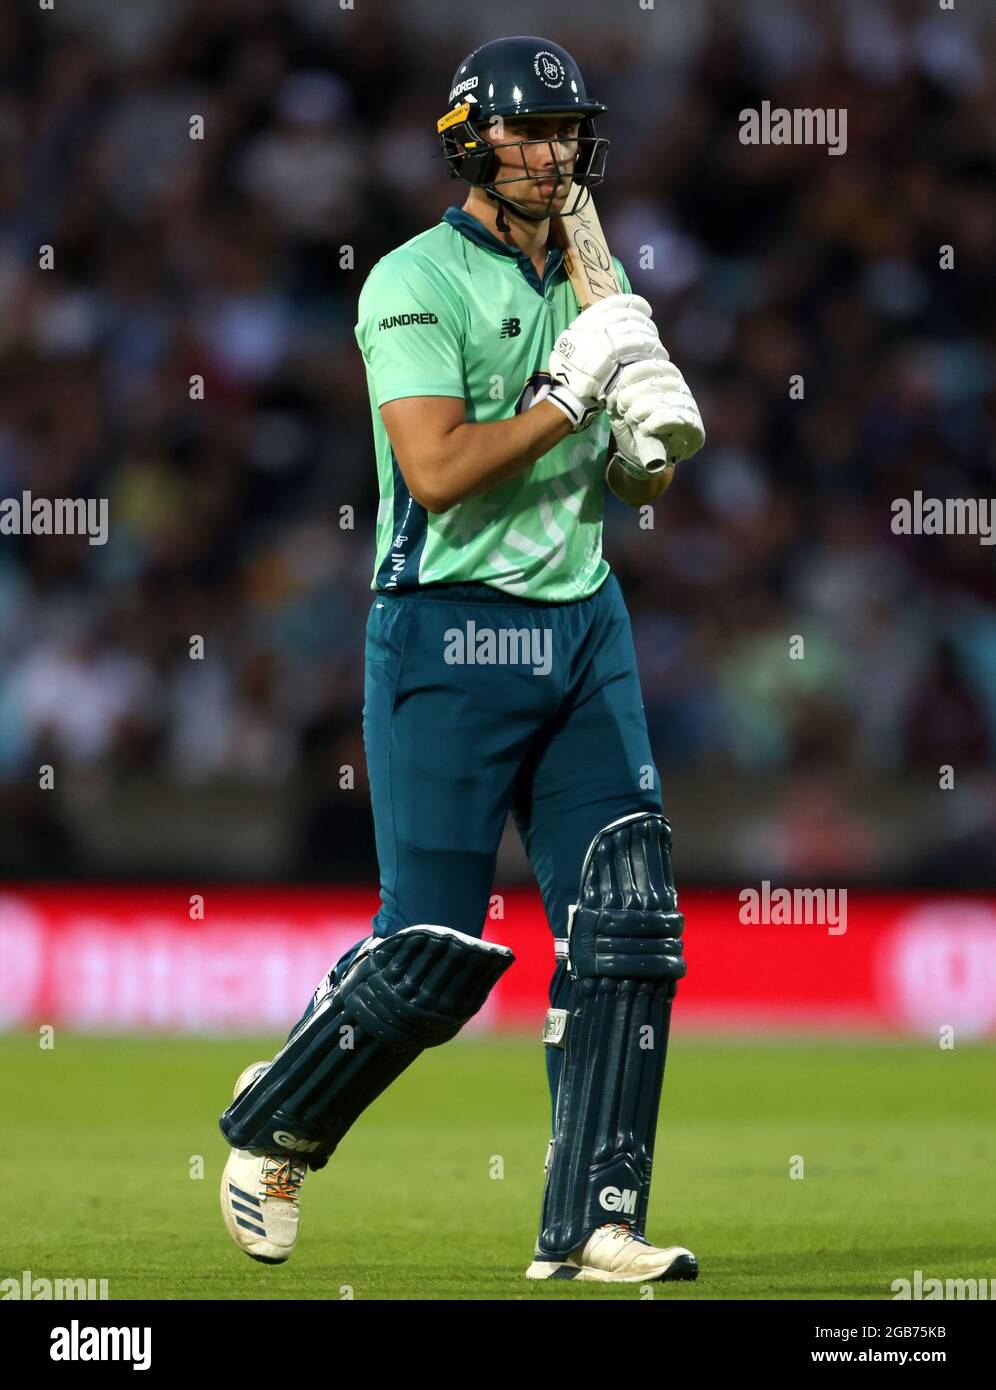 Oval Invincibles' Will Jacks walks off after being caught and dismissed by Welsh Fire's Josh Cobb during The Hundred match at the Kia Oval, London. Picture date: Monday August 2, 2021. Stock Photo